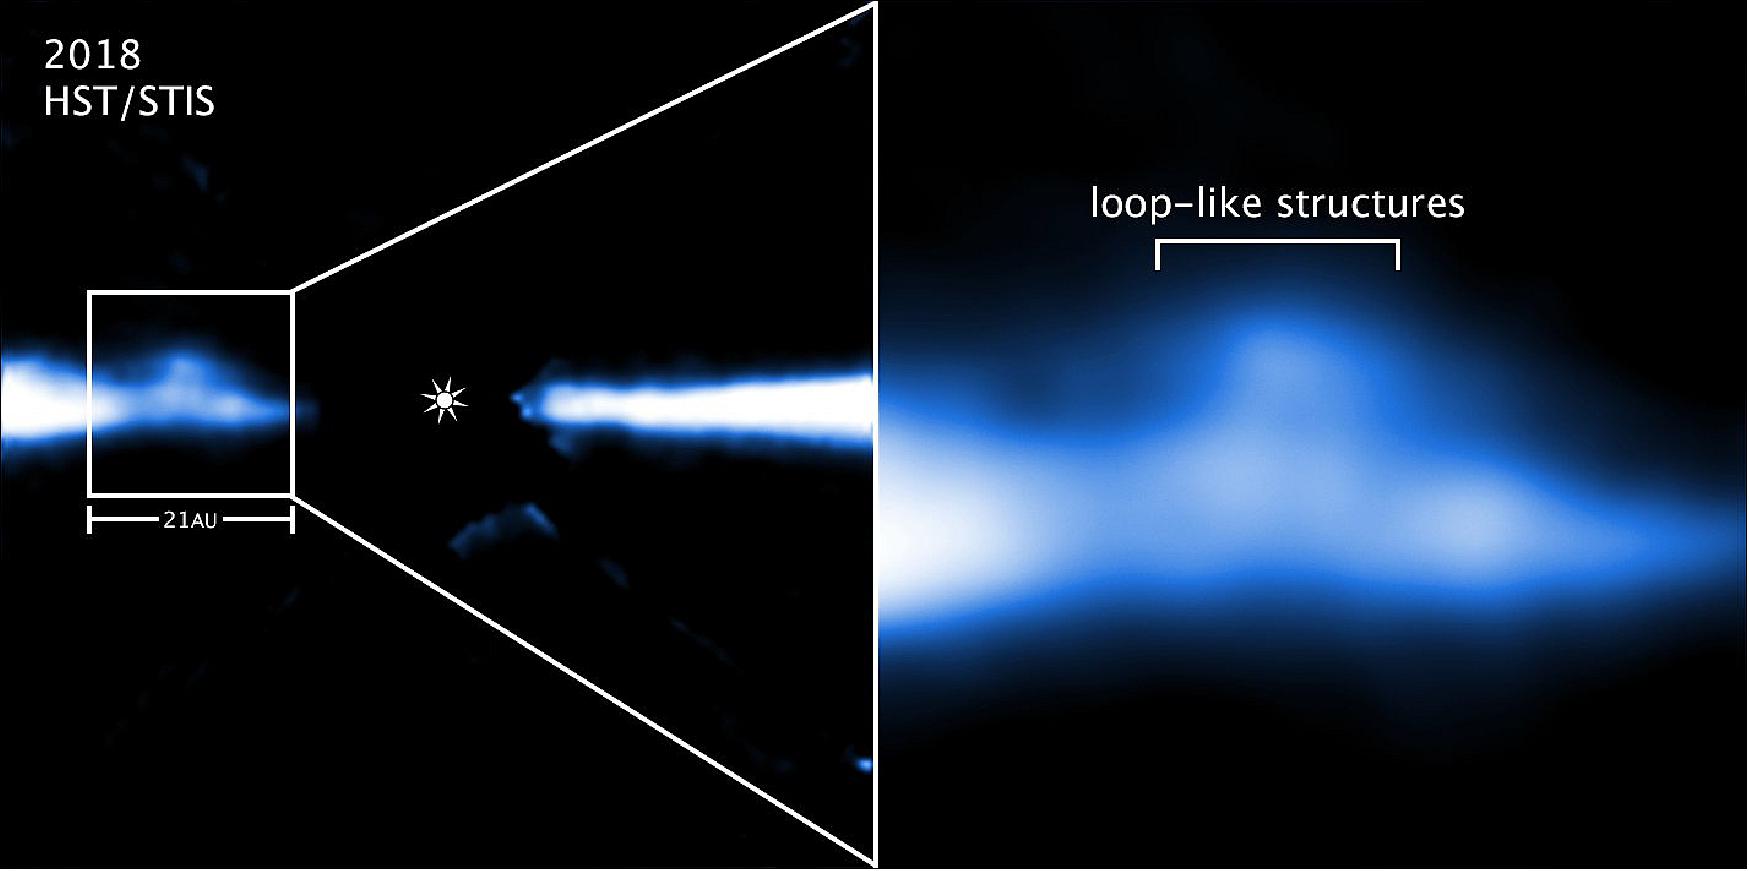 Figure 82: The Hubble Space Telescope image on the left is an edge-on view of a portion of a vast debris disk around the young, nearby red dwarf star AU Microscopii (AU Mic). Though planets may have already formed in the disk, Hubble is tracking the movement of several huge blobs of material that could be "snowplowing" remaining debris out of the system, including comets and asteroids. The box in the image at left highlights one blob of material extending above and below the disk. Hubble's Space Telescope Imaging Spectrograph (STIS) took the picture in 2018, in visible light. The glare of the star, located at the center of the disk, has been blocked out by the STIS coronagraph so that astronomers can see more structure in the disk. The STIS close-up image at right reveals, for the first time, details in the blobby material, including a loop-like structure and a mushroom-shaped cap. Astronomers expect the train of blobs to clear out the disk within only 1.5 million years. The consequences are that any rocky planets could be left bone-dry and lifeless, because comets and asteroids will no longer be available to glaze the planets with water or organic compounds. AU Mic is approximately 23 million years old. The system resides 32 light-years away in the southern constellation Microscopium. Credit: NASA, ESA, J. Wisniewski (University of Oklahoma), [image credit: C. Grady (Eureka Scientific), and G. Schneider (Steward Observatory)]